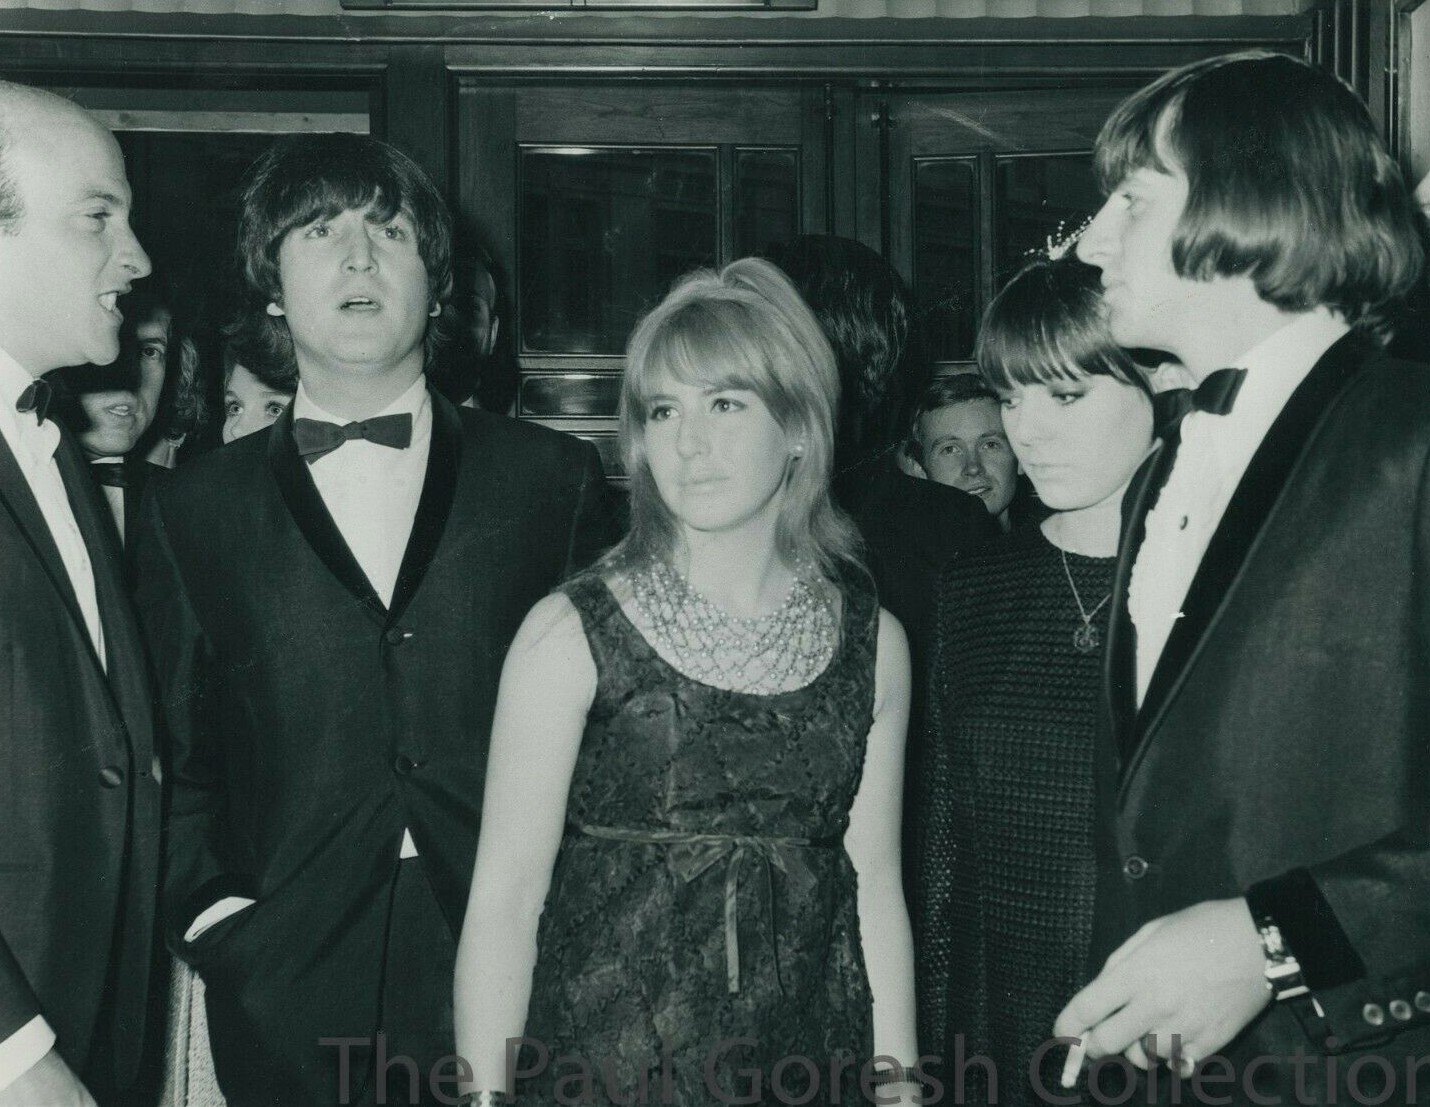 Meet the Beatles for Real: Movie premieres